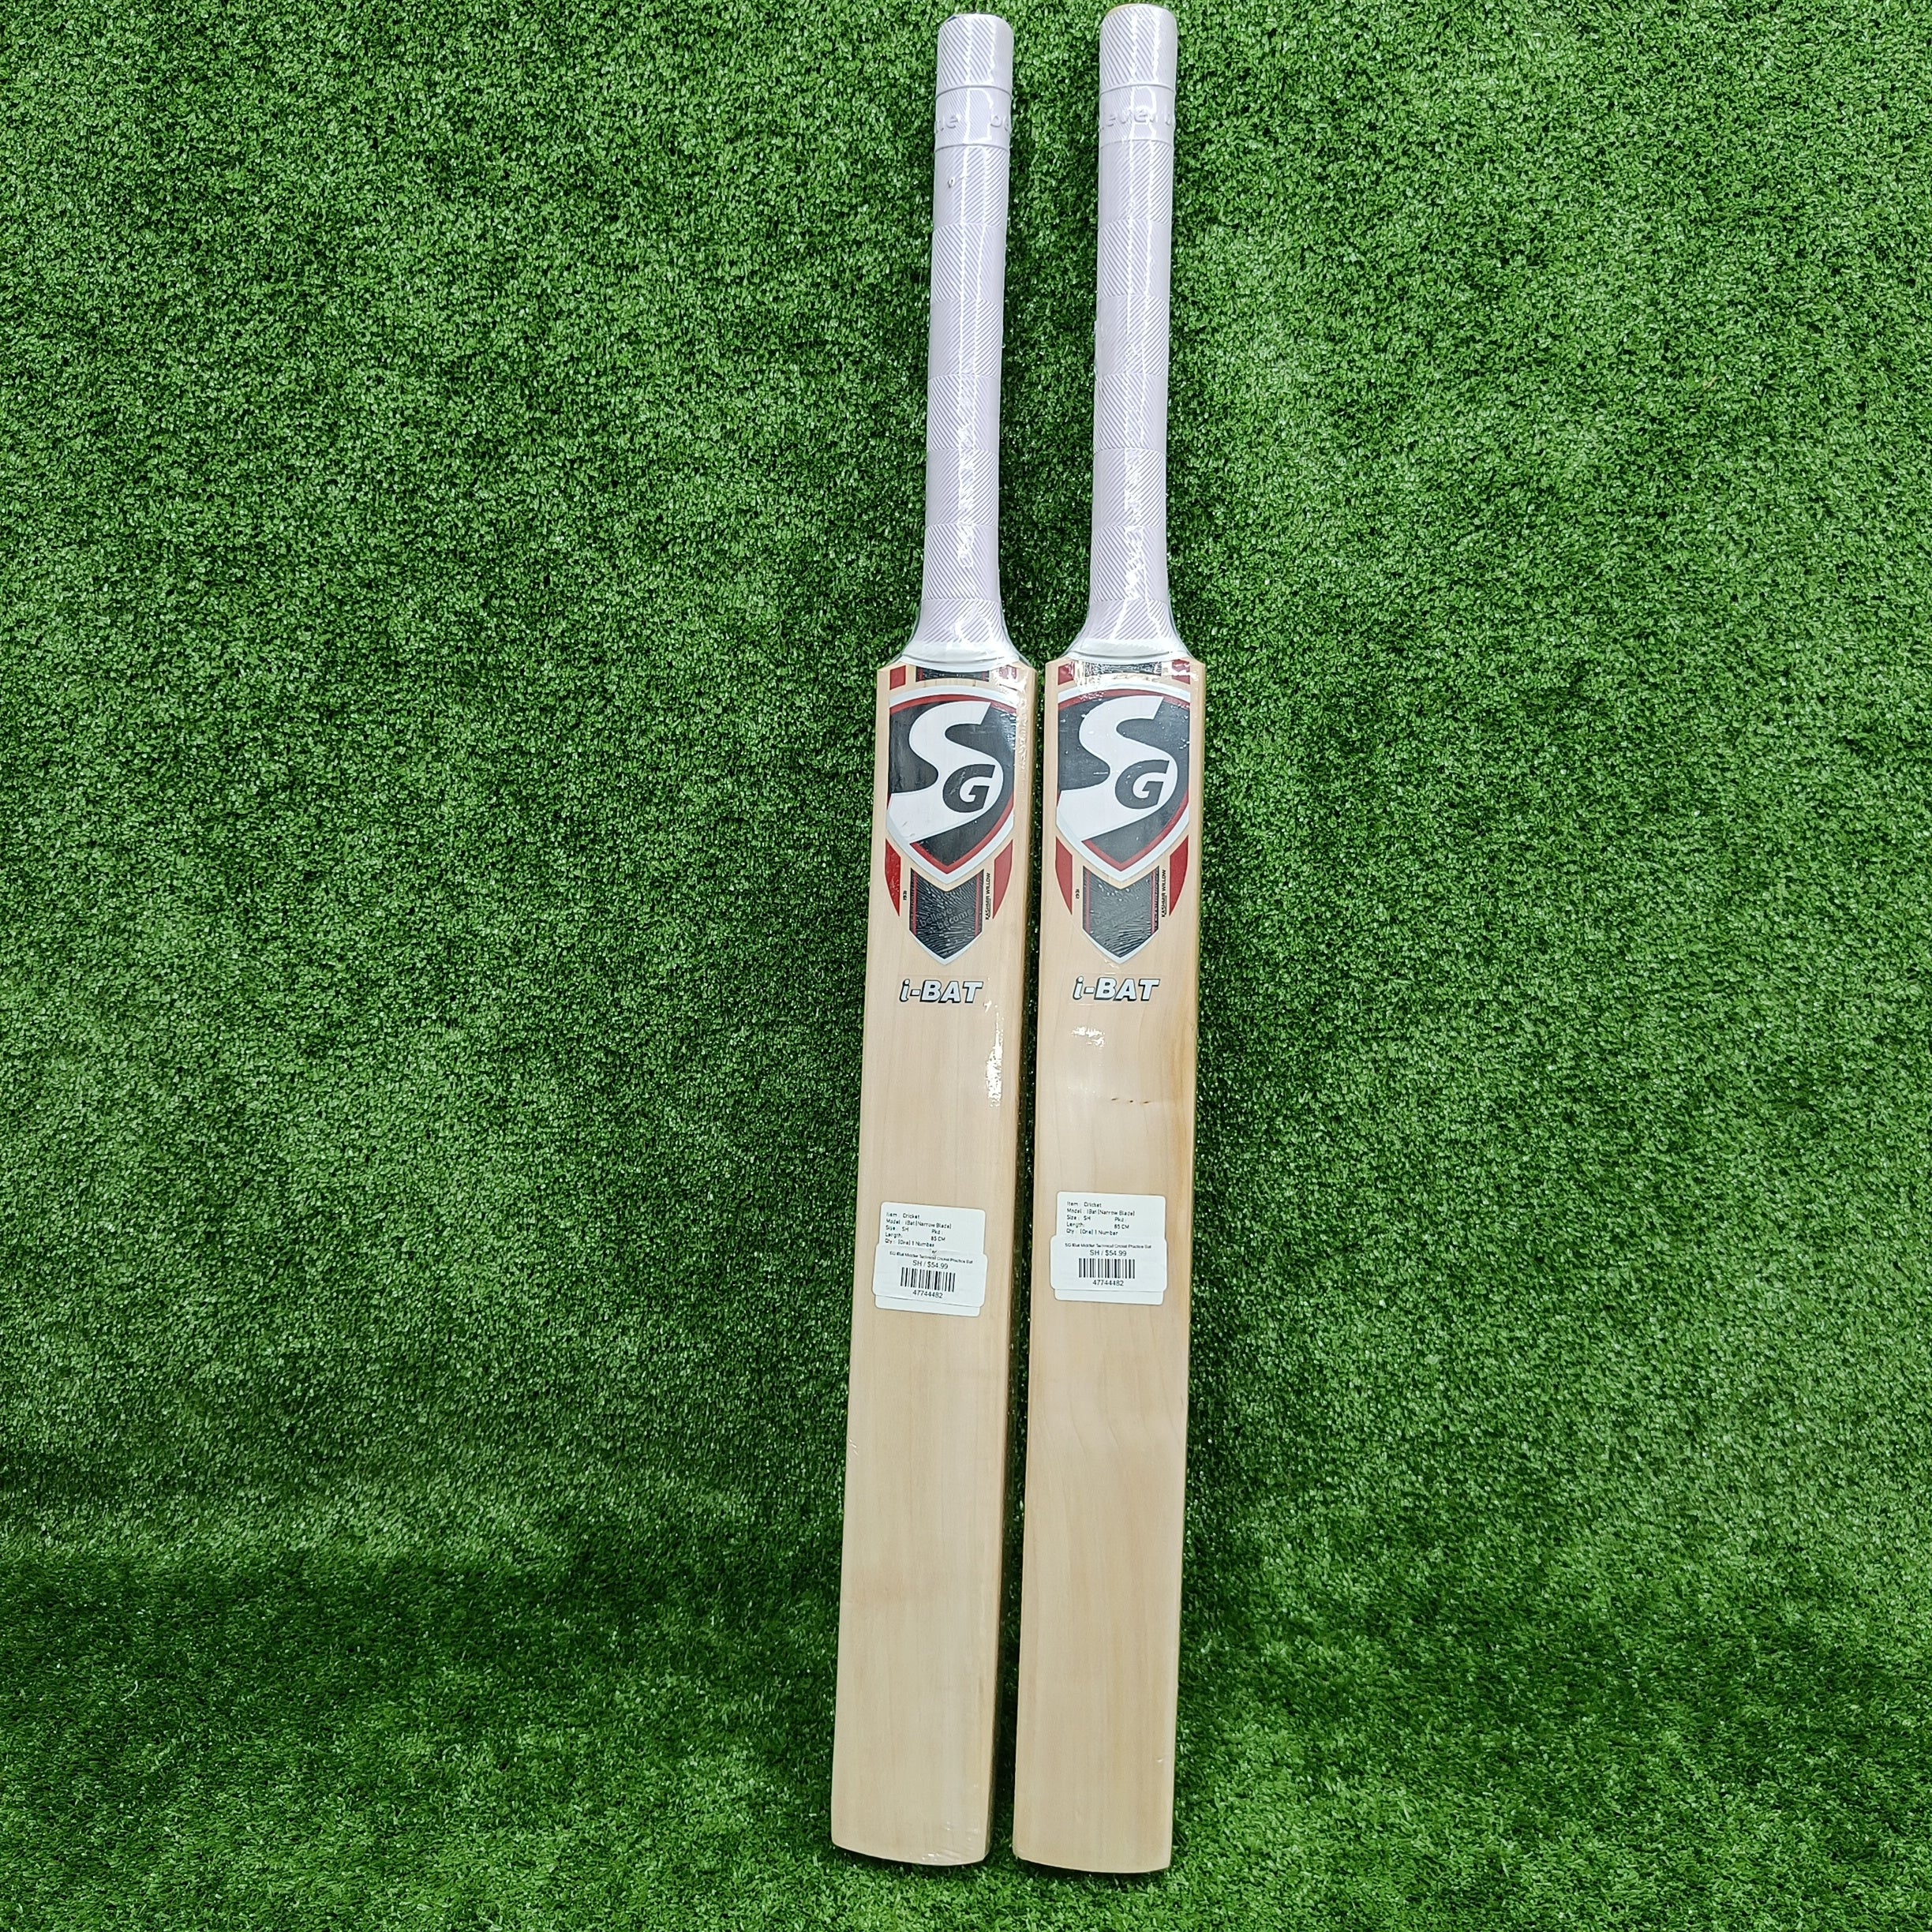 SG Middling Technical Leather Ball Cricket Practice Bat (iBat)